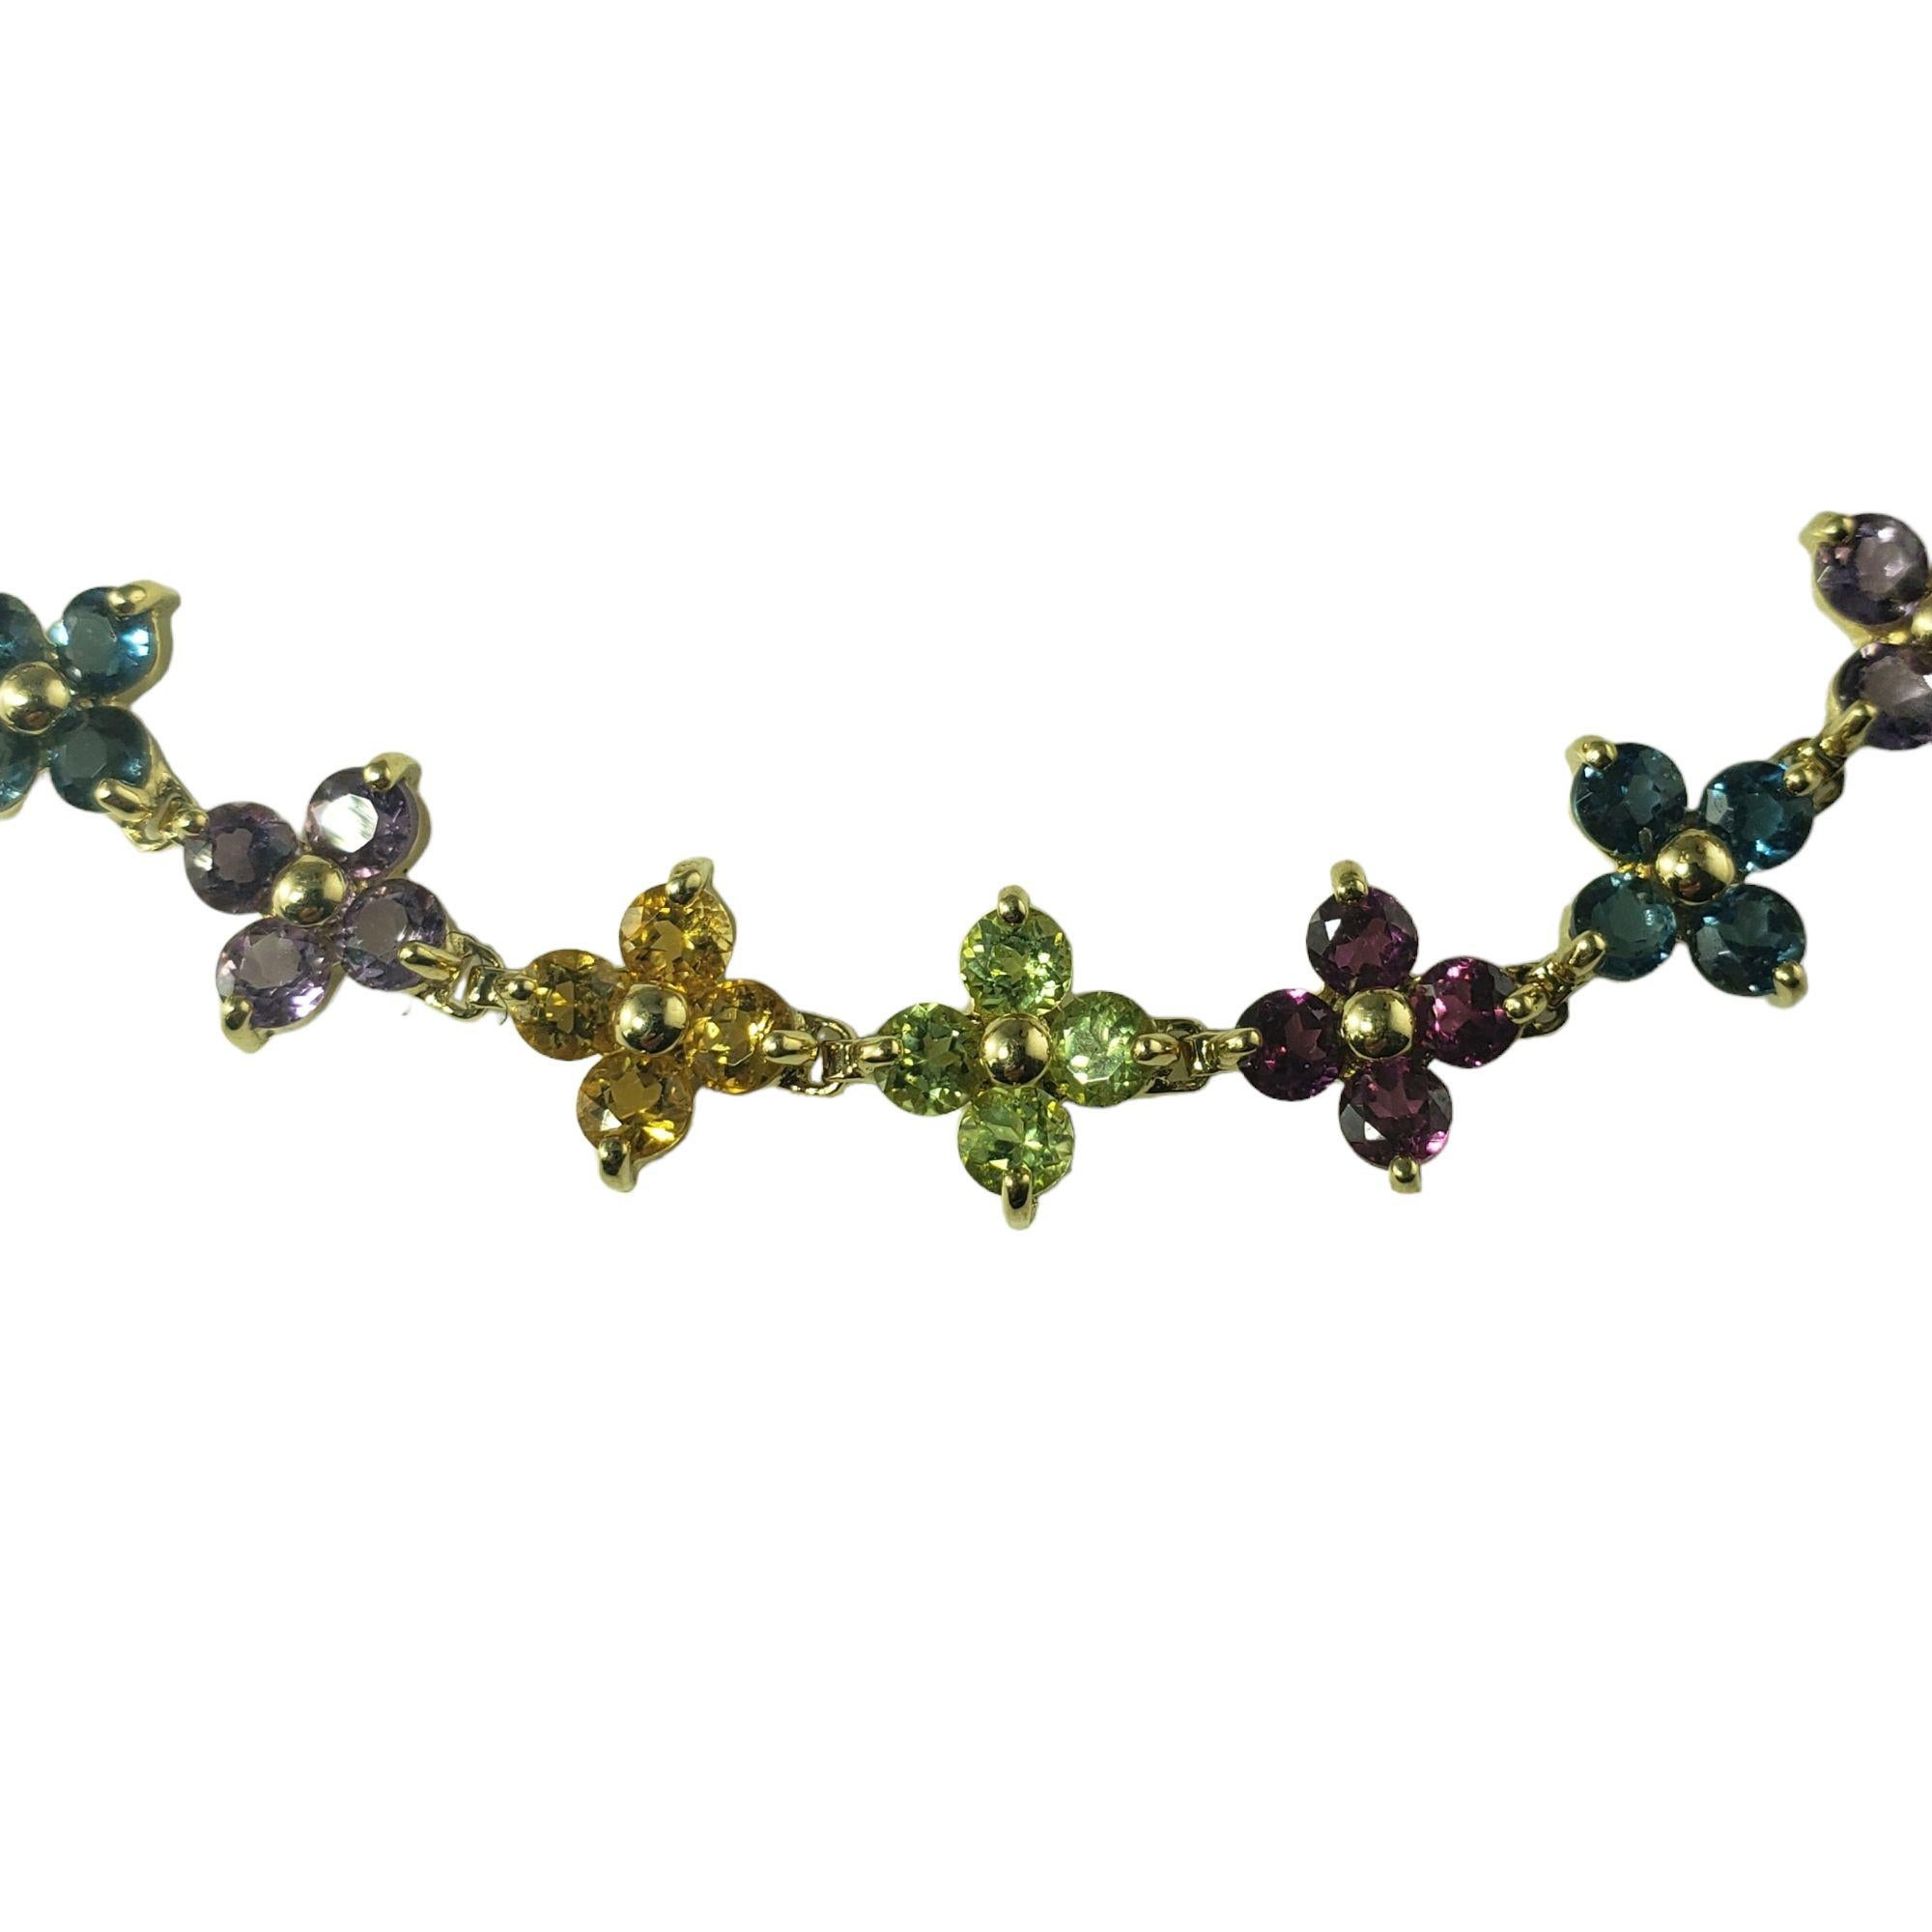 This elegant floral motif bracelet is decorated with 16 round garnets, 16 round blue topaz, 16 round amethysts, 12 round citrines and

12 round peridots set in 14K yellow gold.  Width:  9 mm.

Total garnet weight:  2.56 ct.

Total topaz weight: 